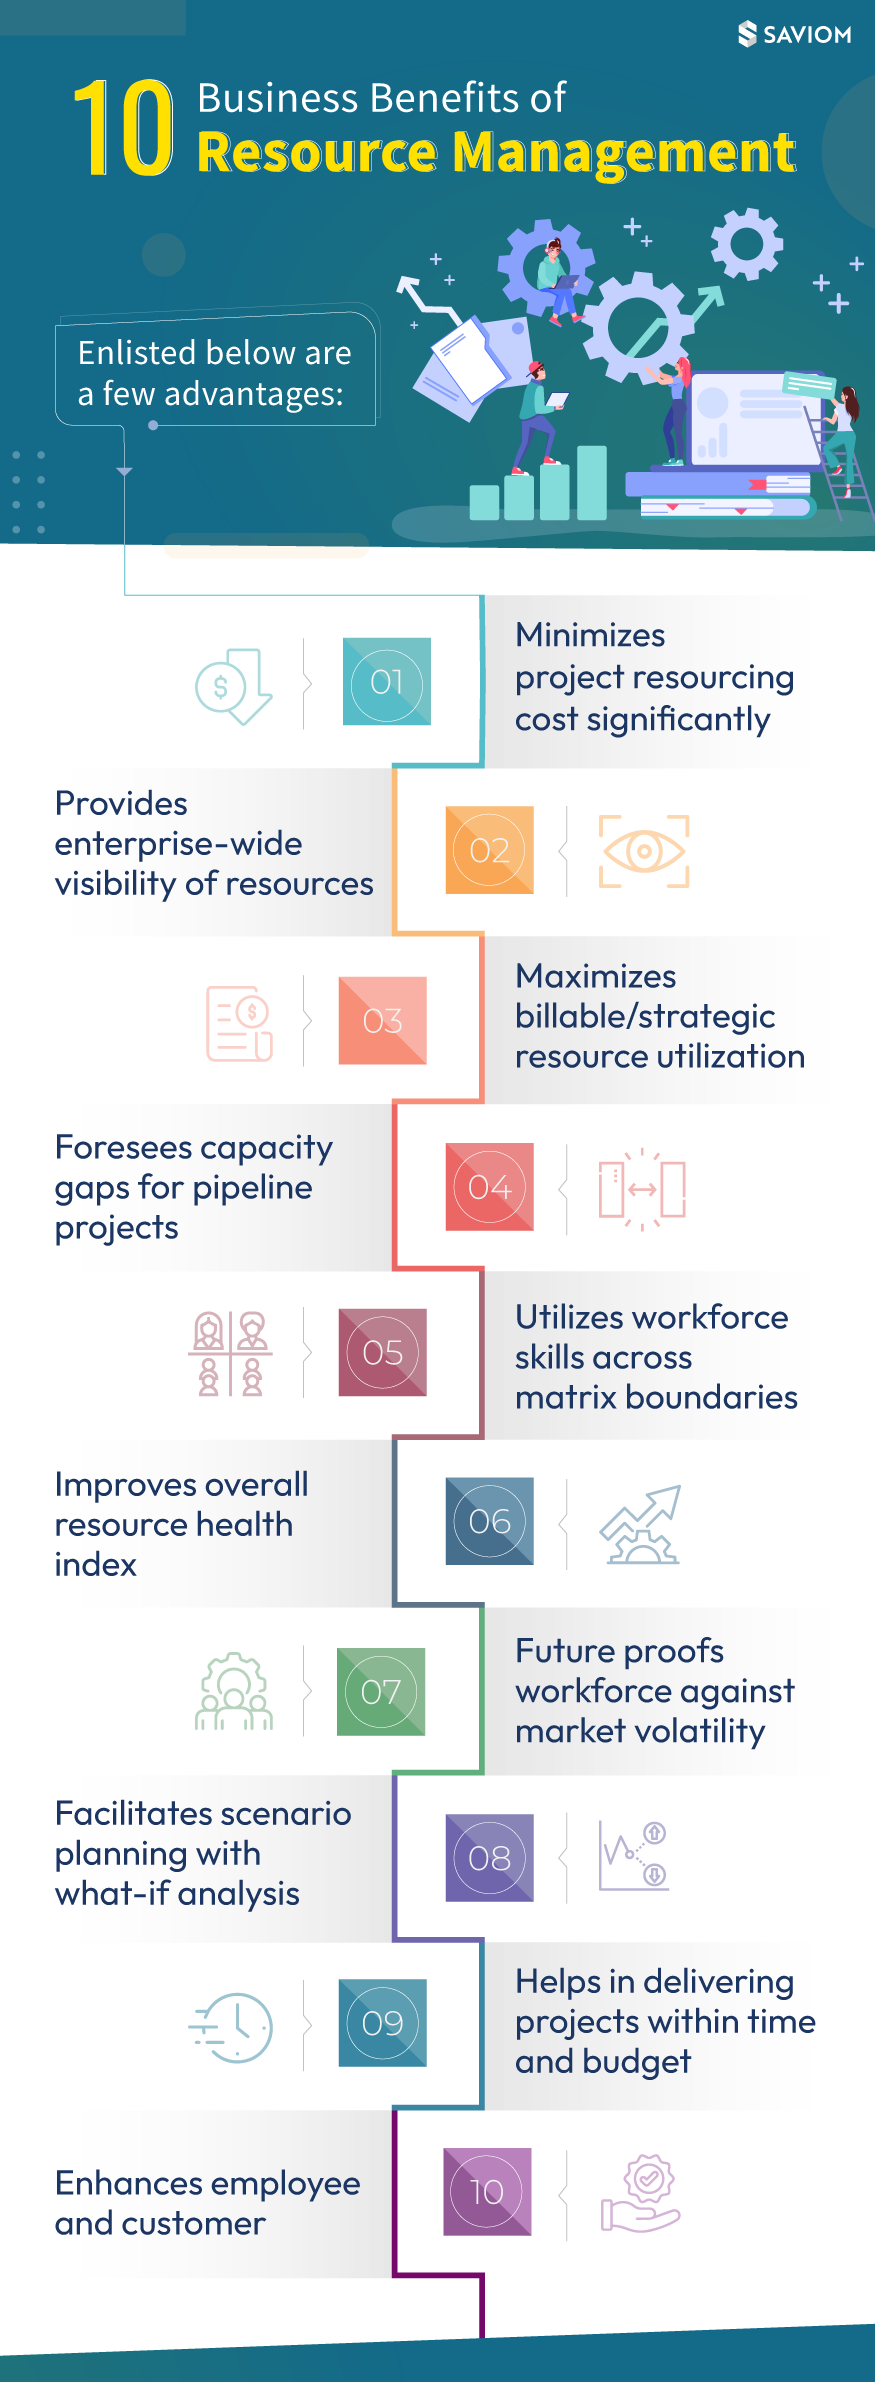 Benefits of Resource Management for a Business